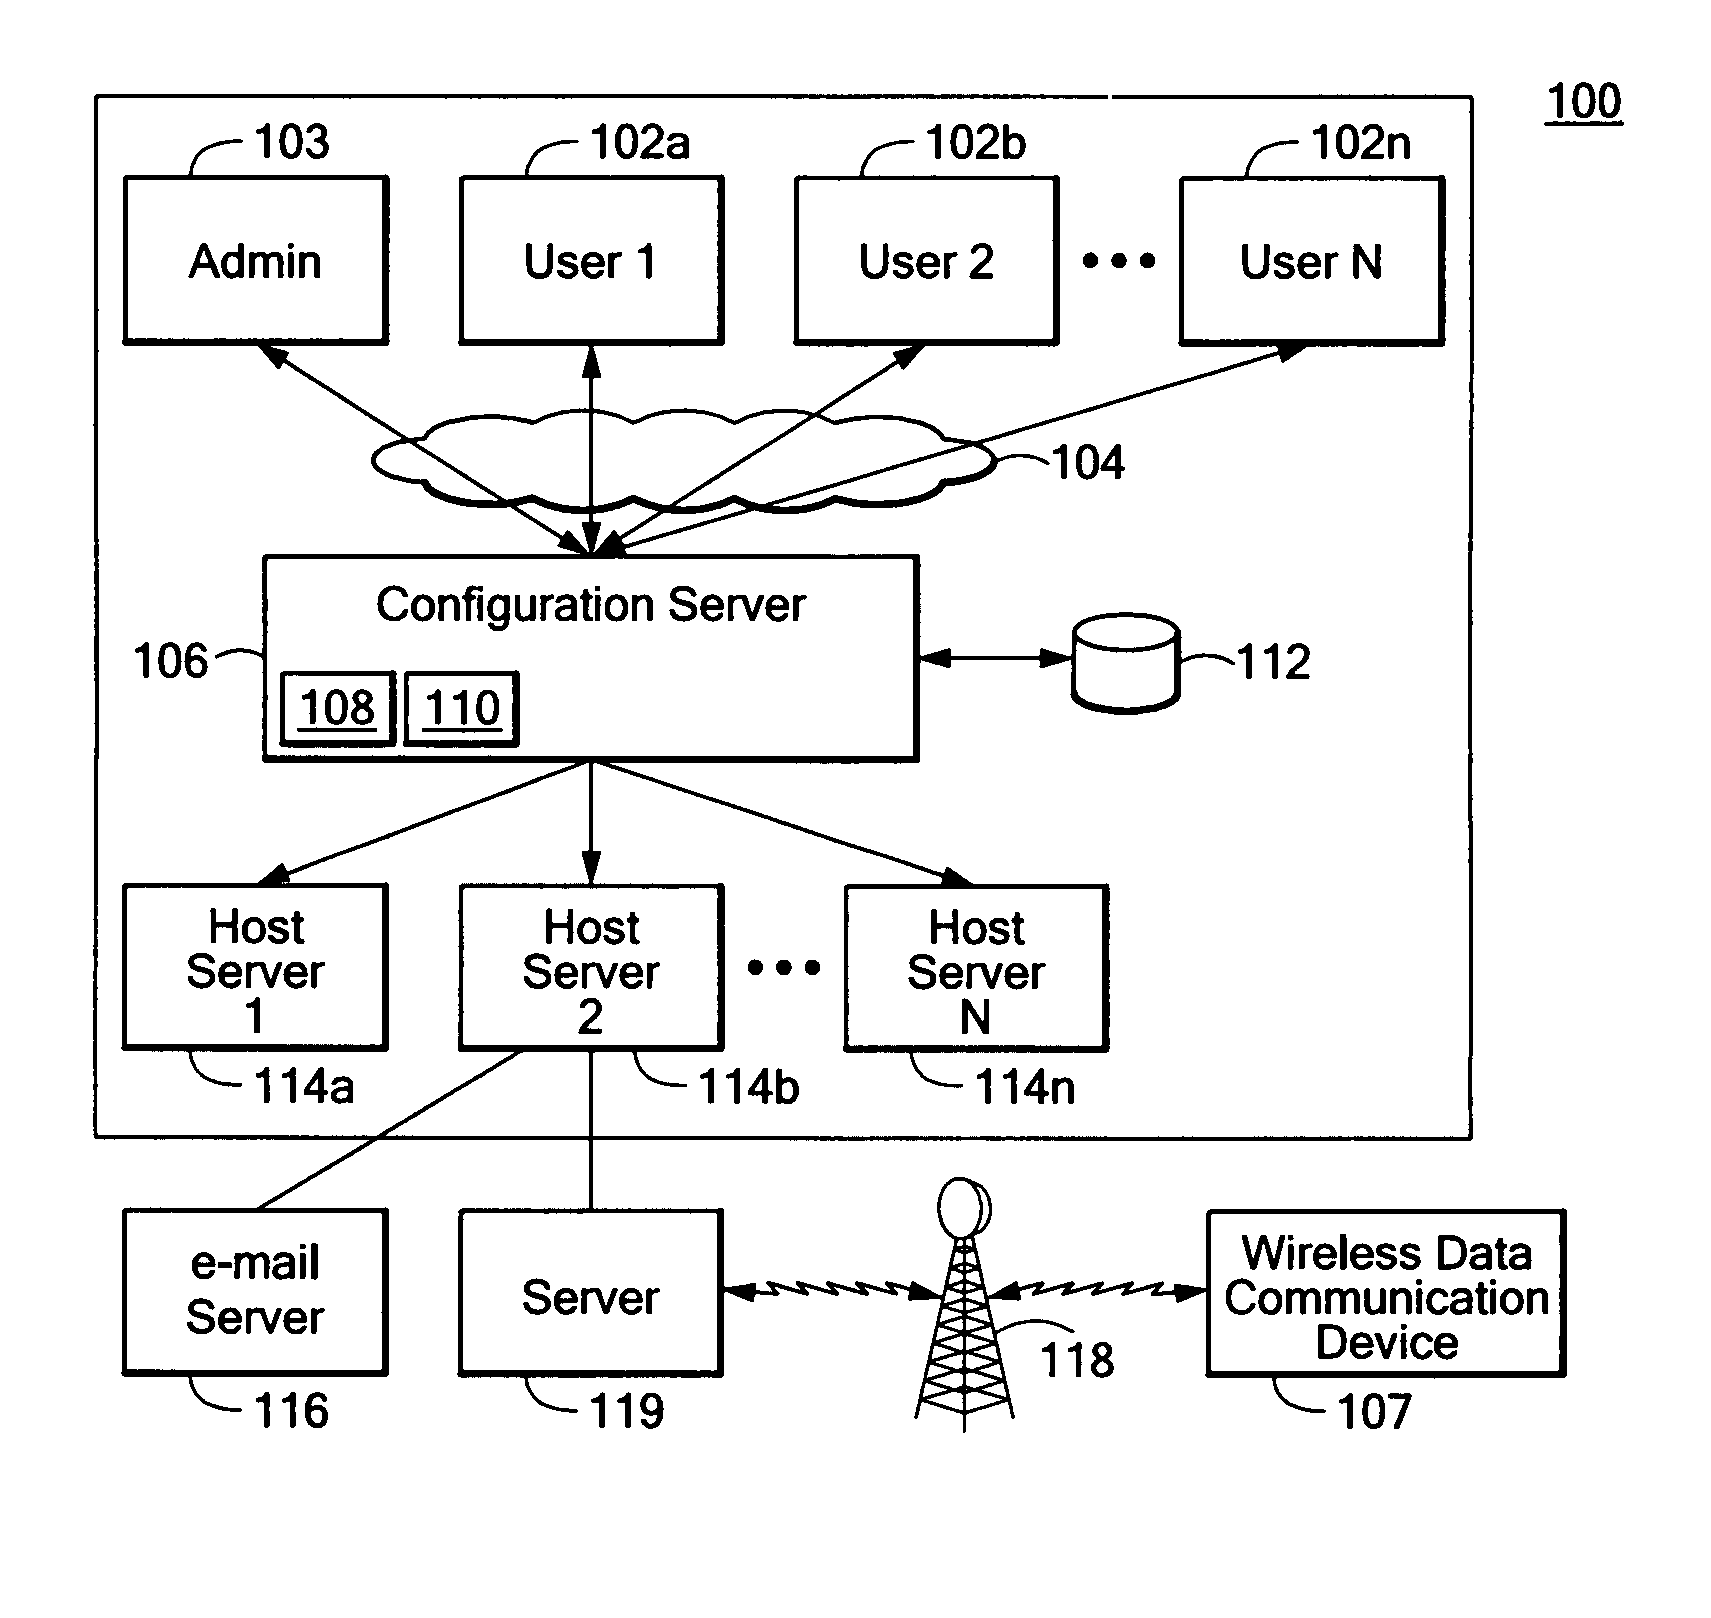 Apparatus and method for provisioning wireless data communication devices